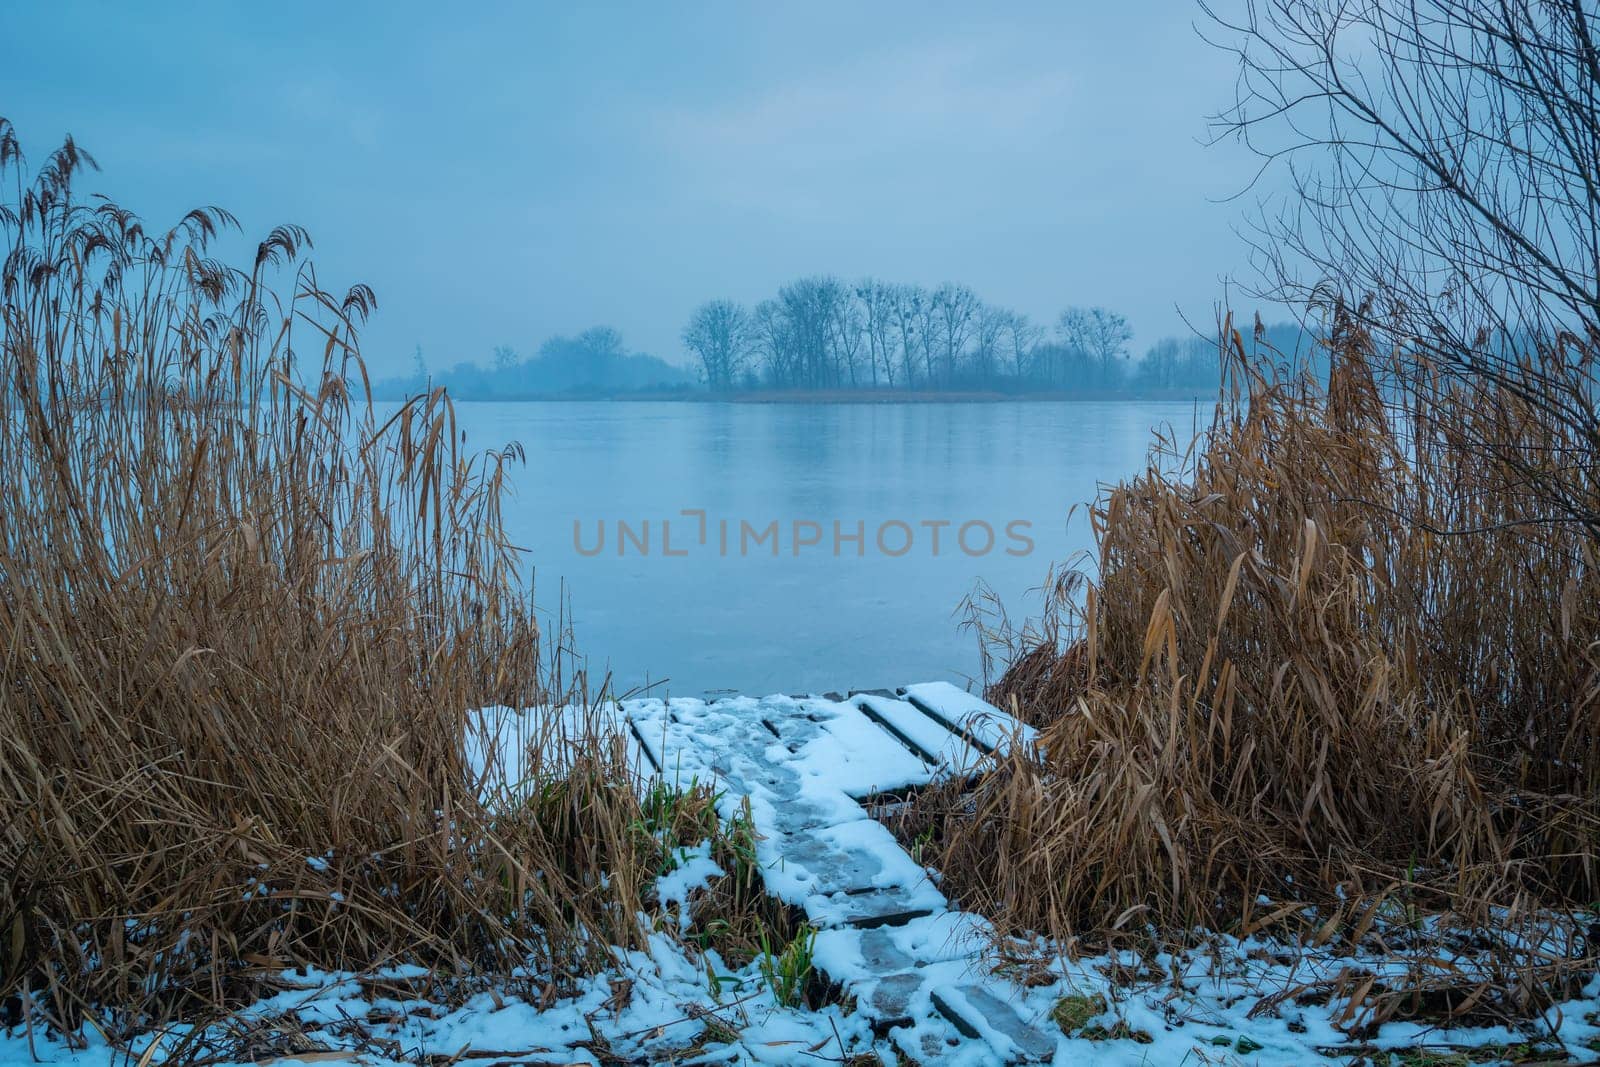 A snow-covered wooden platform in the reeds and a frozen misty lake by darekb22